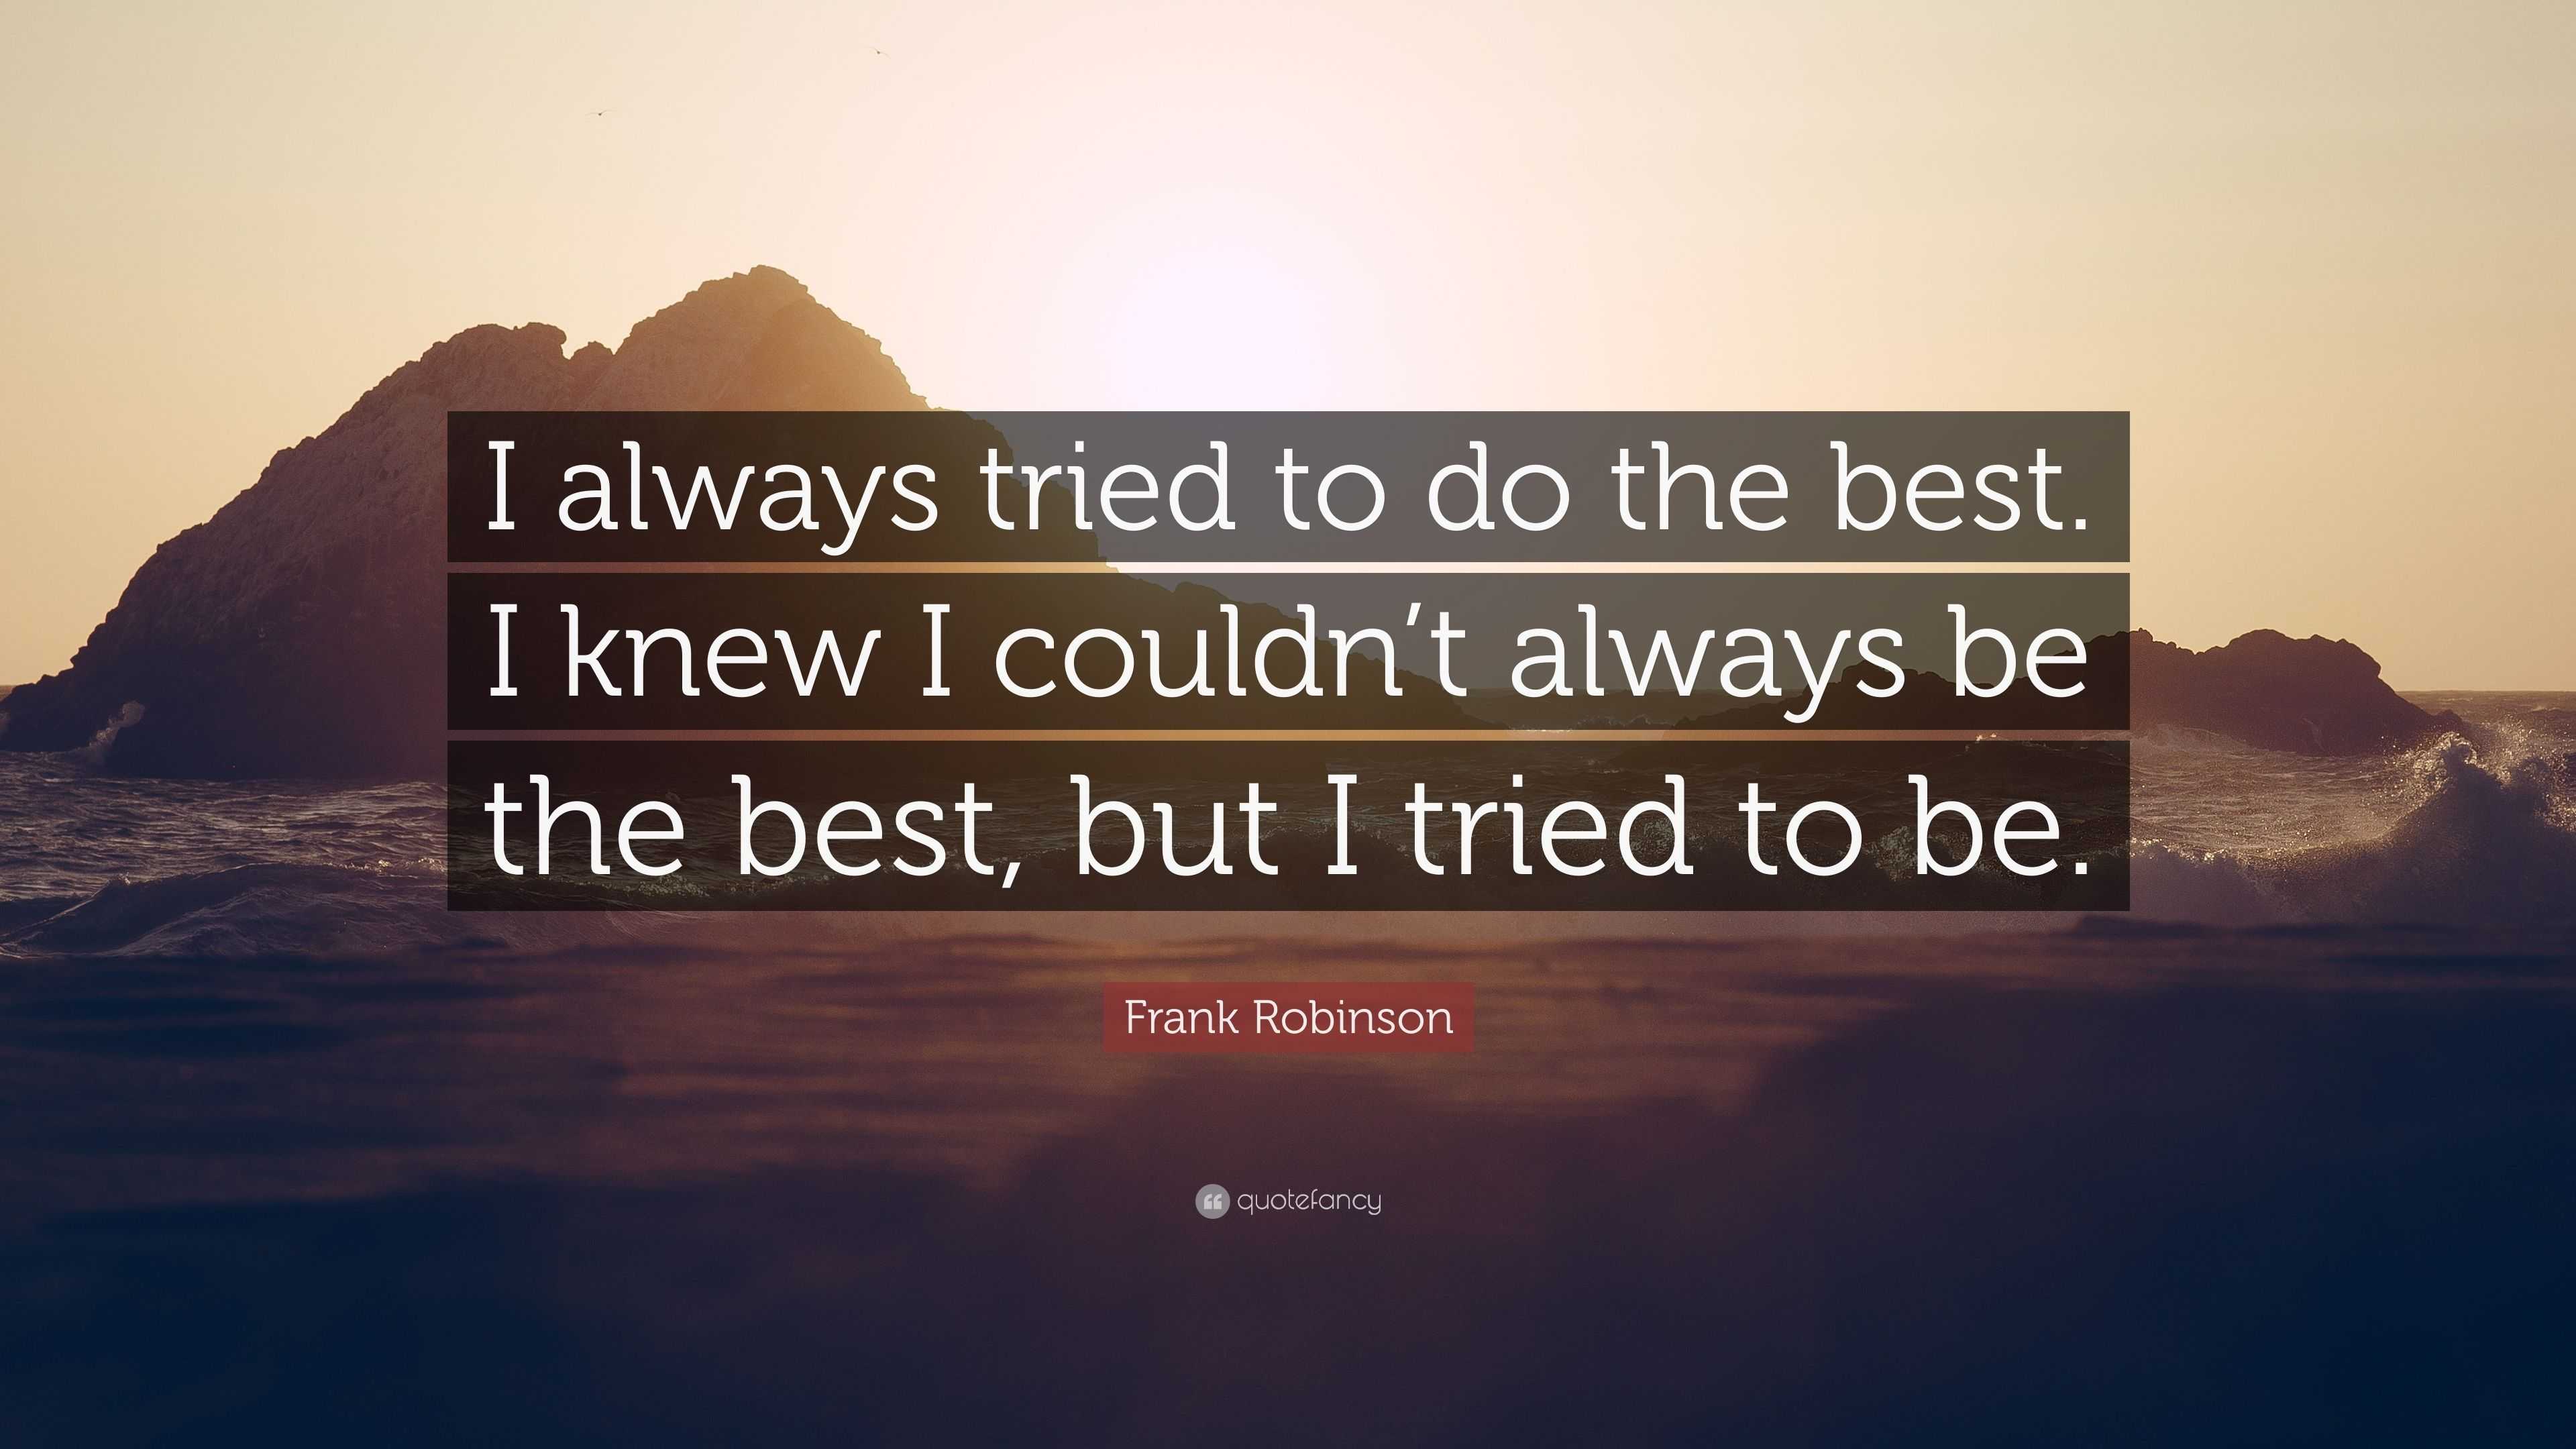 Frank Robinson Quote: “I always tried to do the best. I knew I couldn't  always